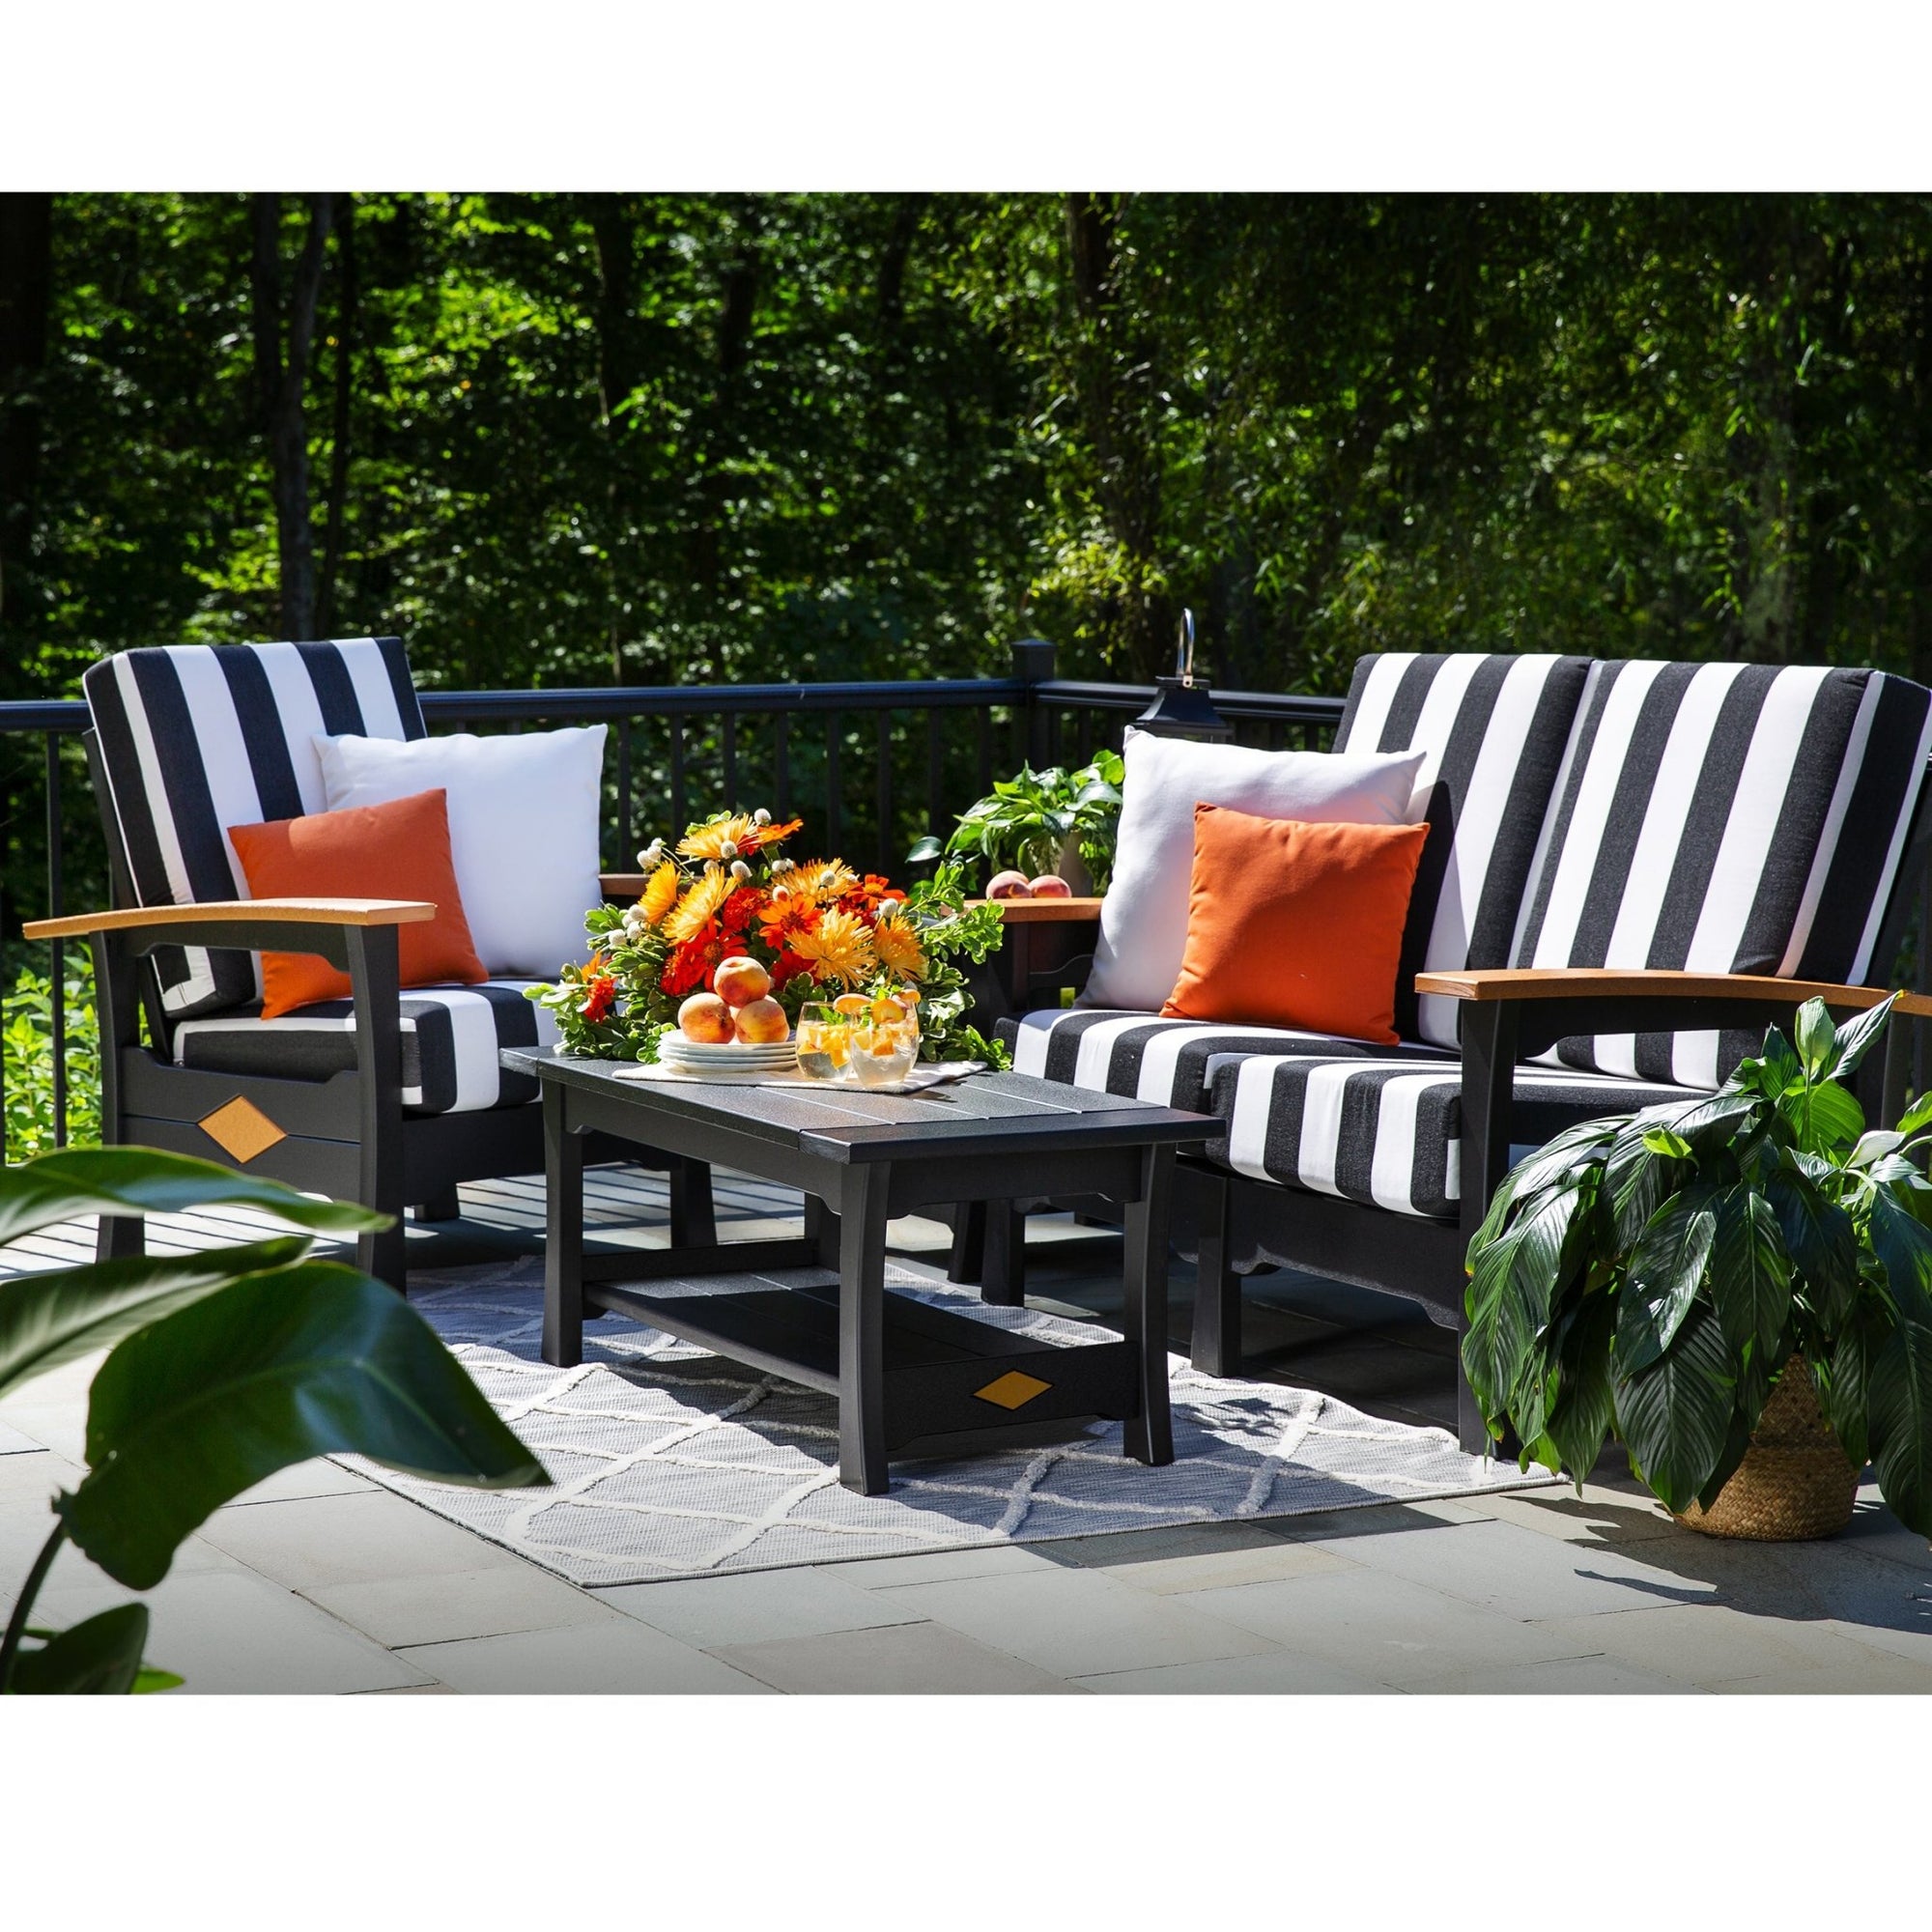 Mission Colonial Loveseat Set Leisure Lawns